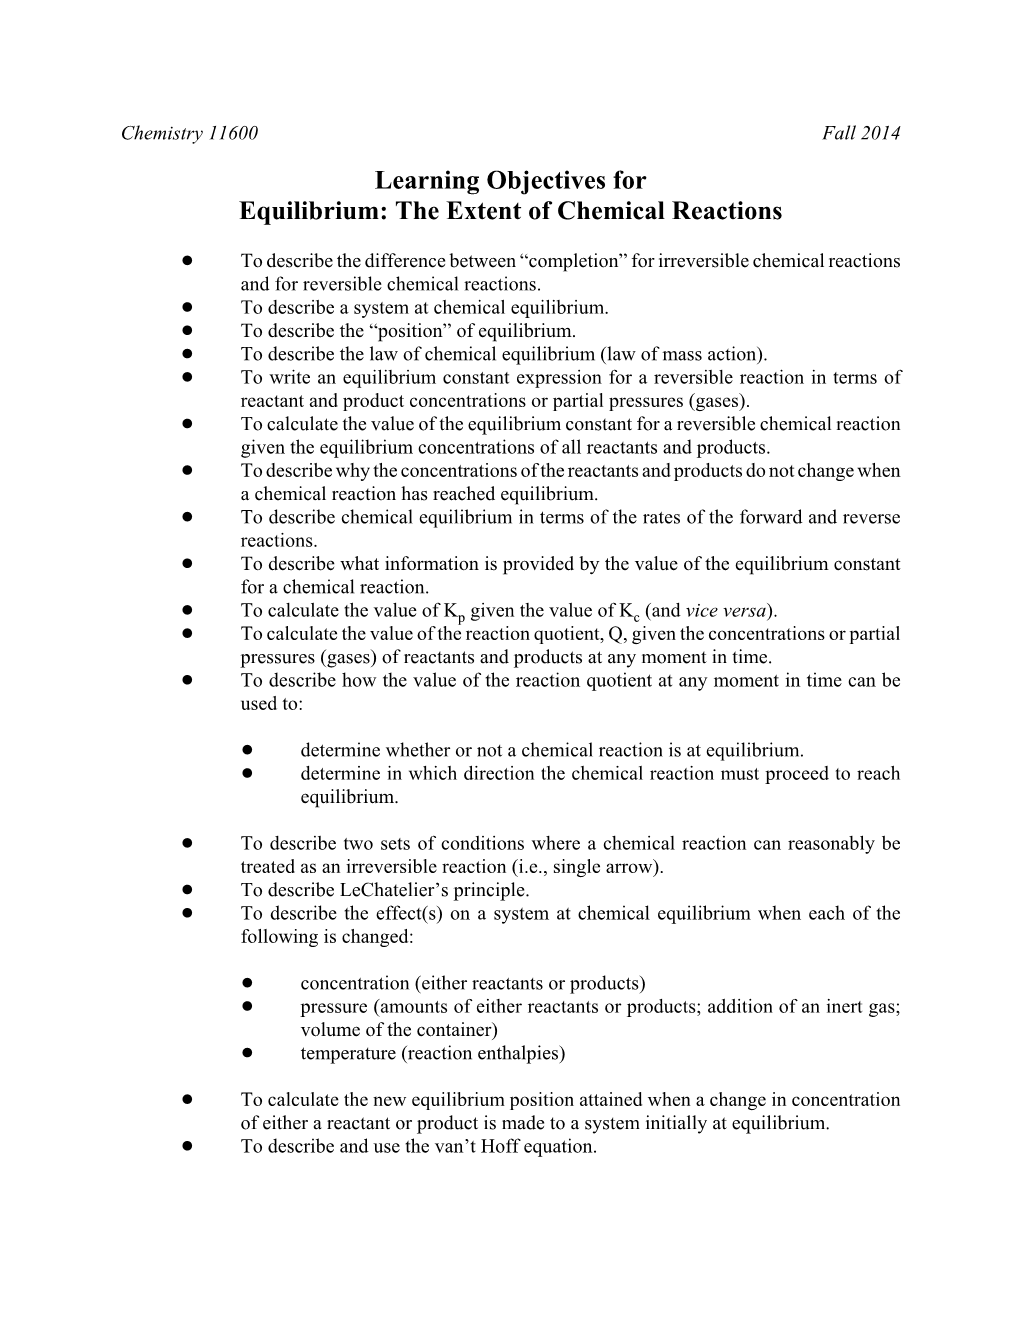 Learning Objectives for Equilibrium: the Extent of Chemical Reactions